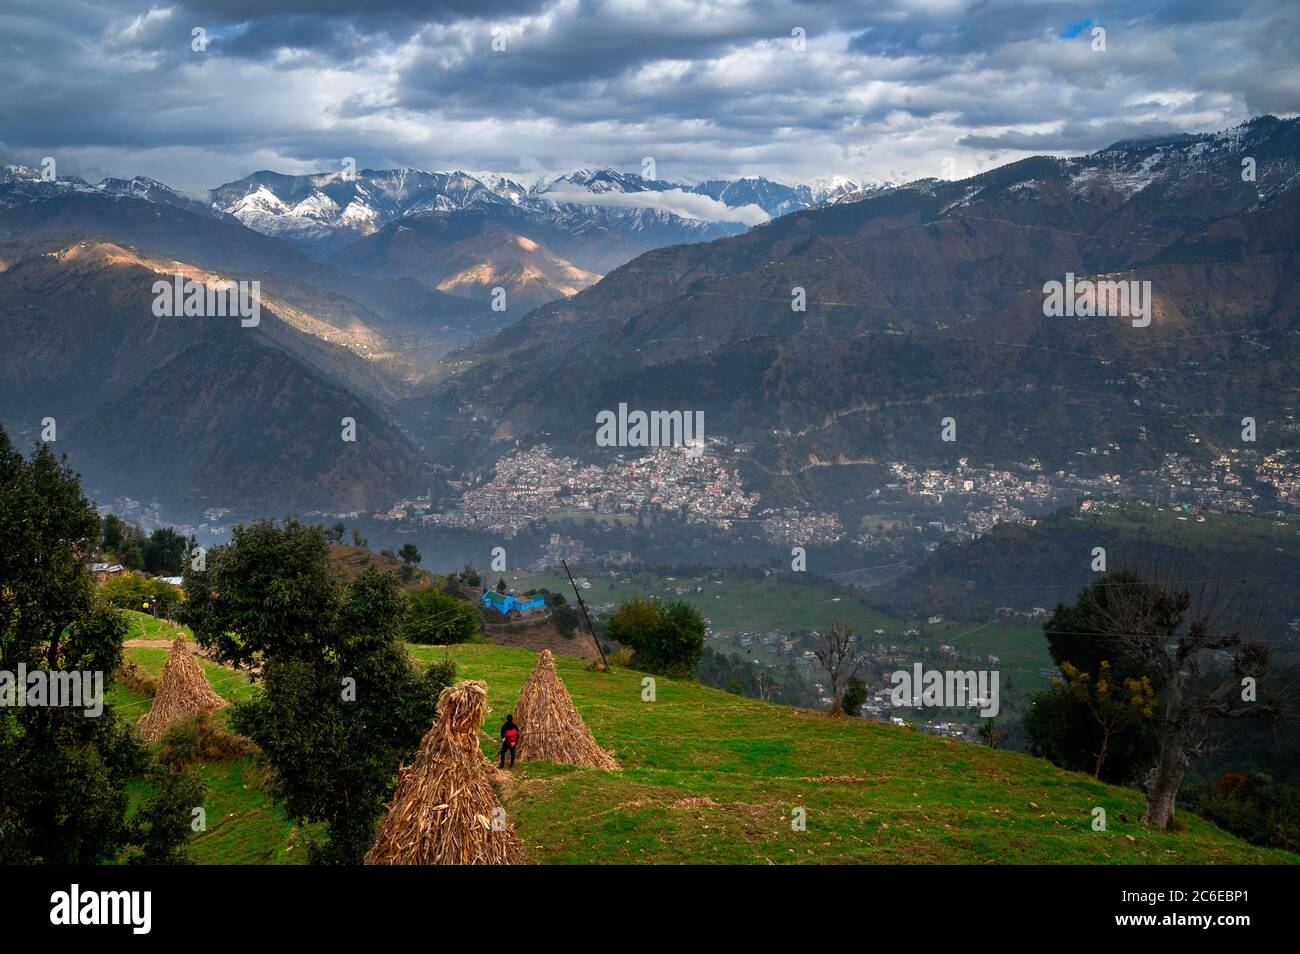 Colorful, vibrant landscape view of Chaba town in winter on Himalayan mountains on way to trek Khajjiar, Himachal Pradesh, India. Stock Photo